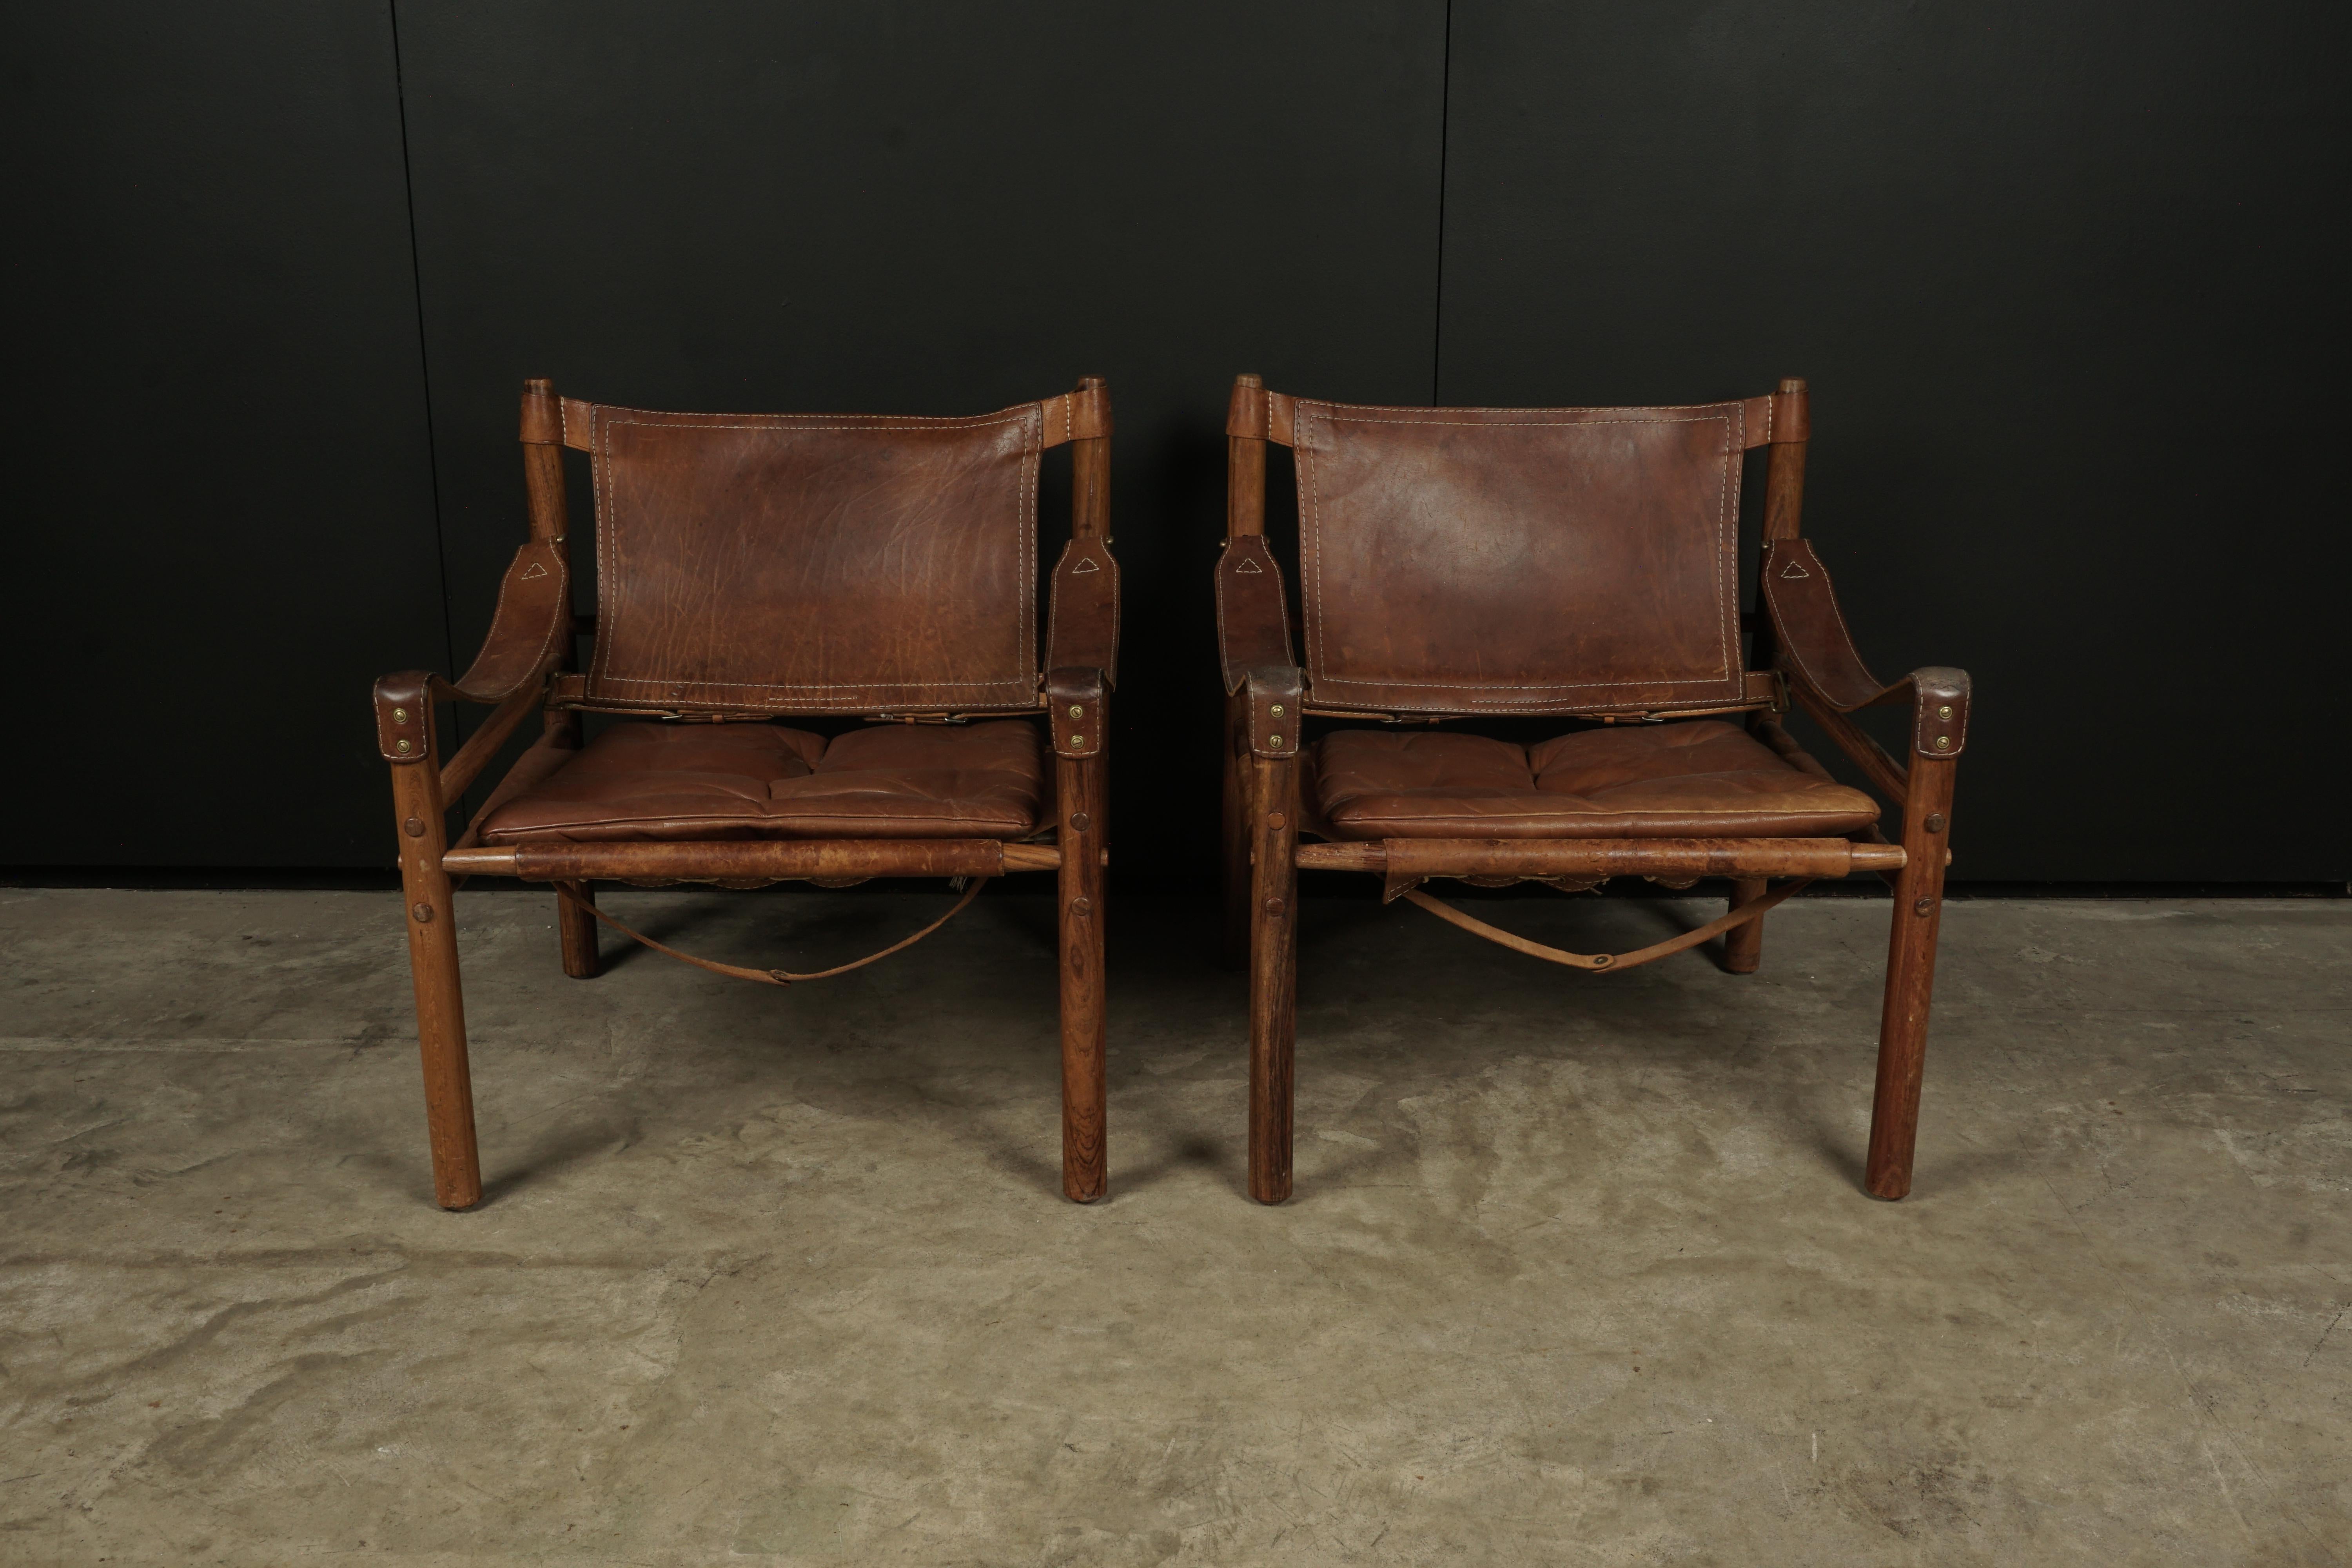 Pair of Arne Norell Safari Lounge Chairs, Model Sirocco, Sweden, 1970s. Original brown leather with nice wear and patina.